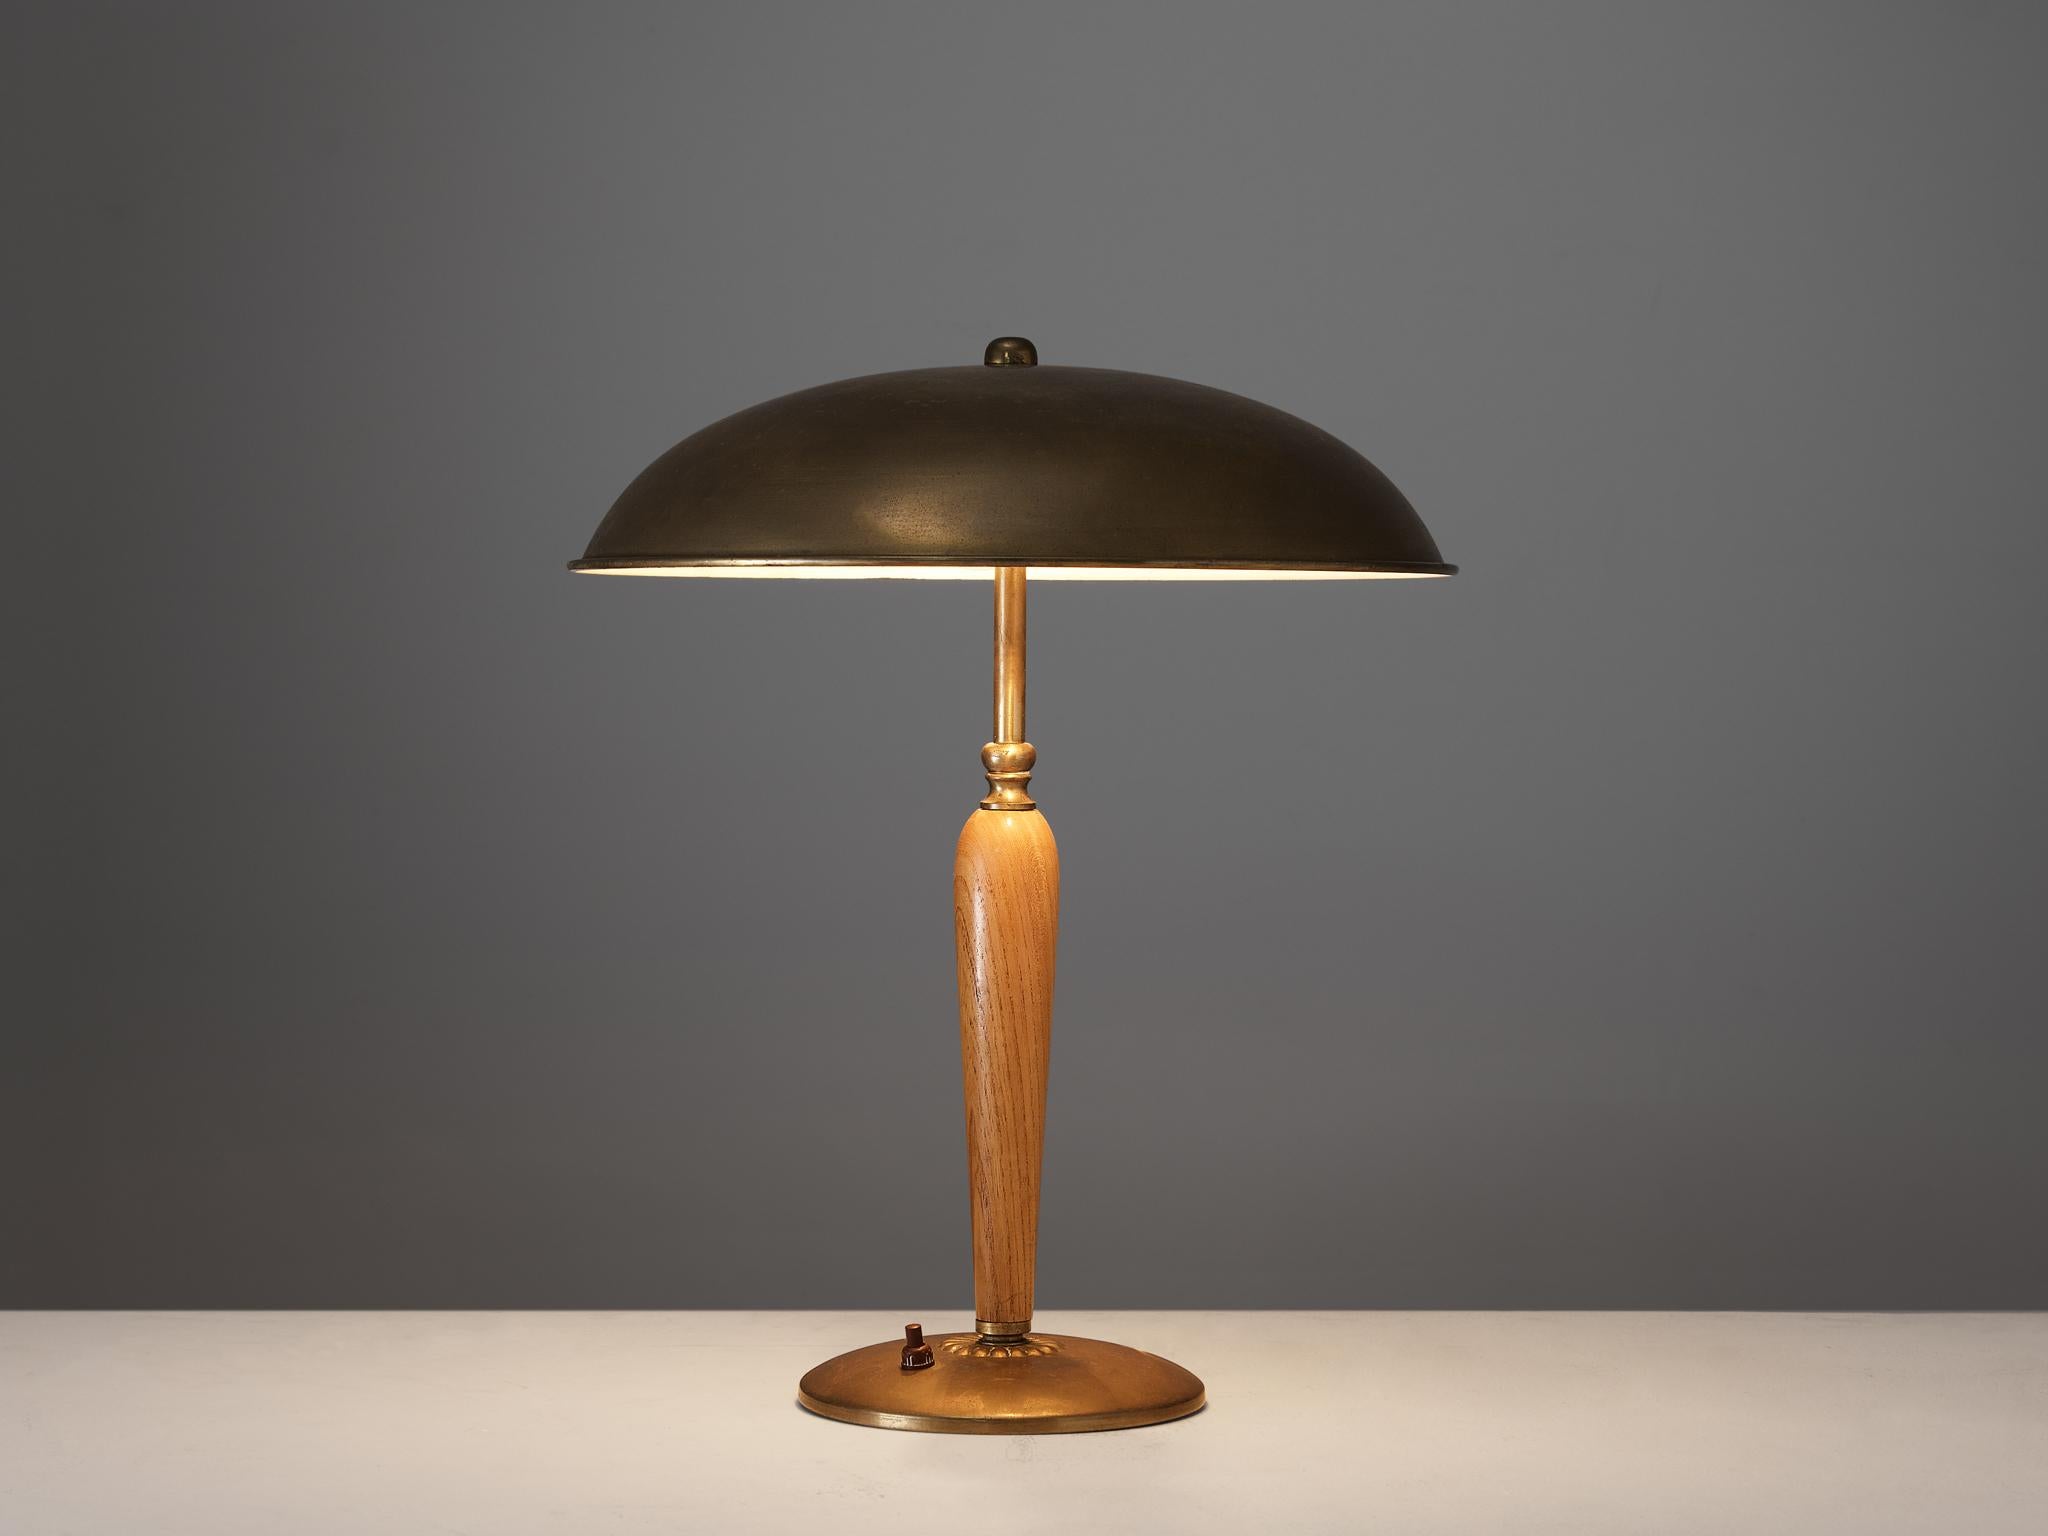 Desk / table lamp, brass, oak, Sweden, 1940s.

This exquisite table lamp of Swedish origin undoubtedly breathes the late Art Deco Period of the 1940s. The shade is executed in a semicircular shape with a white lacquered interior which creates a a